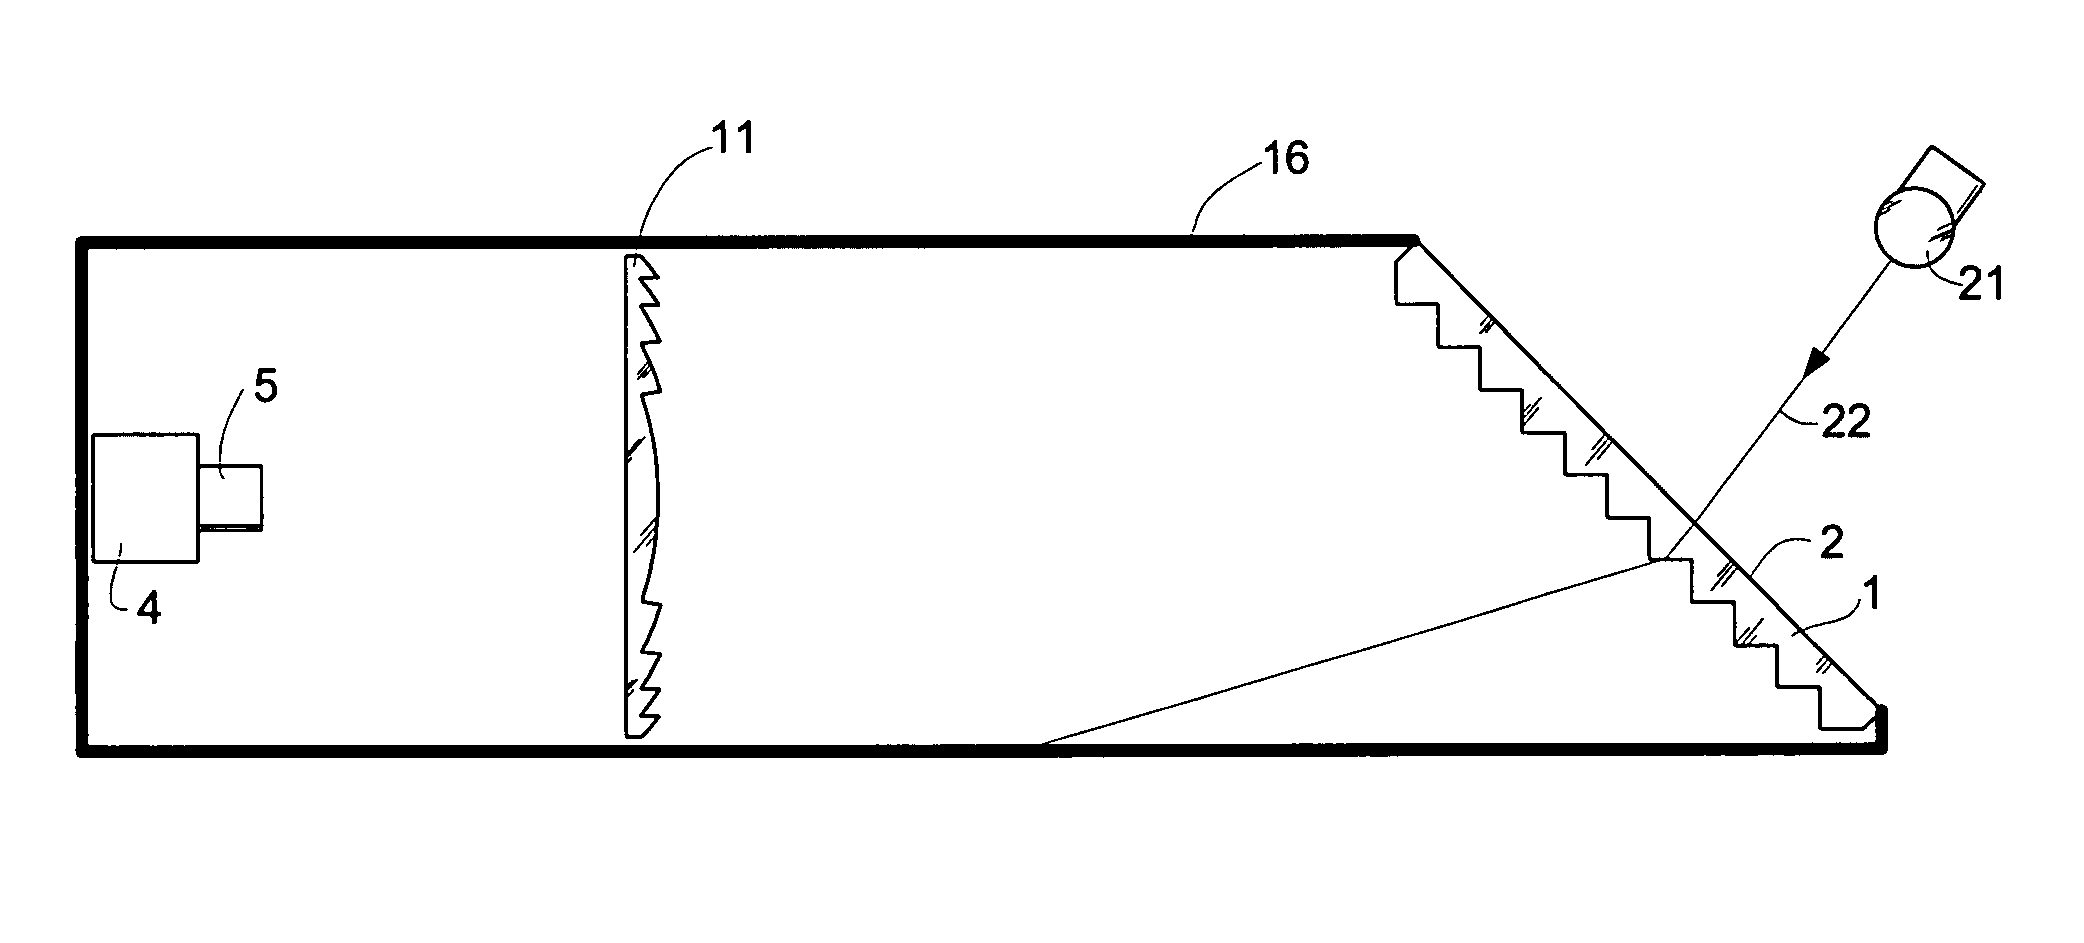 Low-cost graphic input device with uniform sensitivity and no keystone distortion